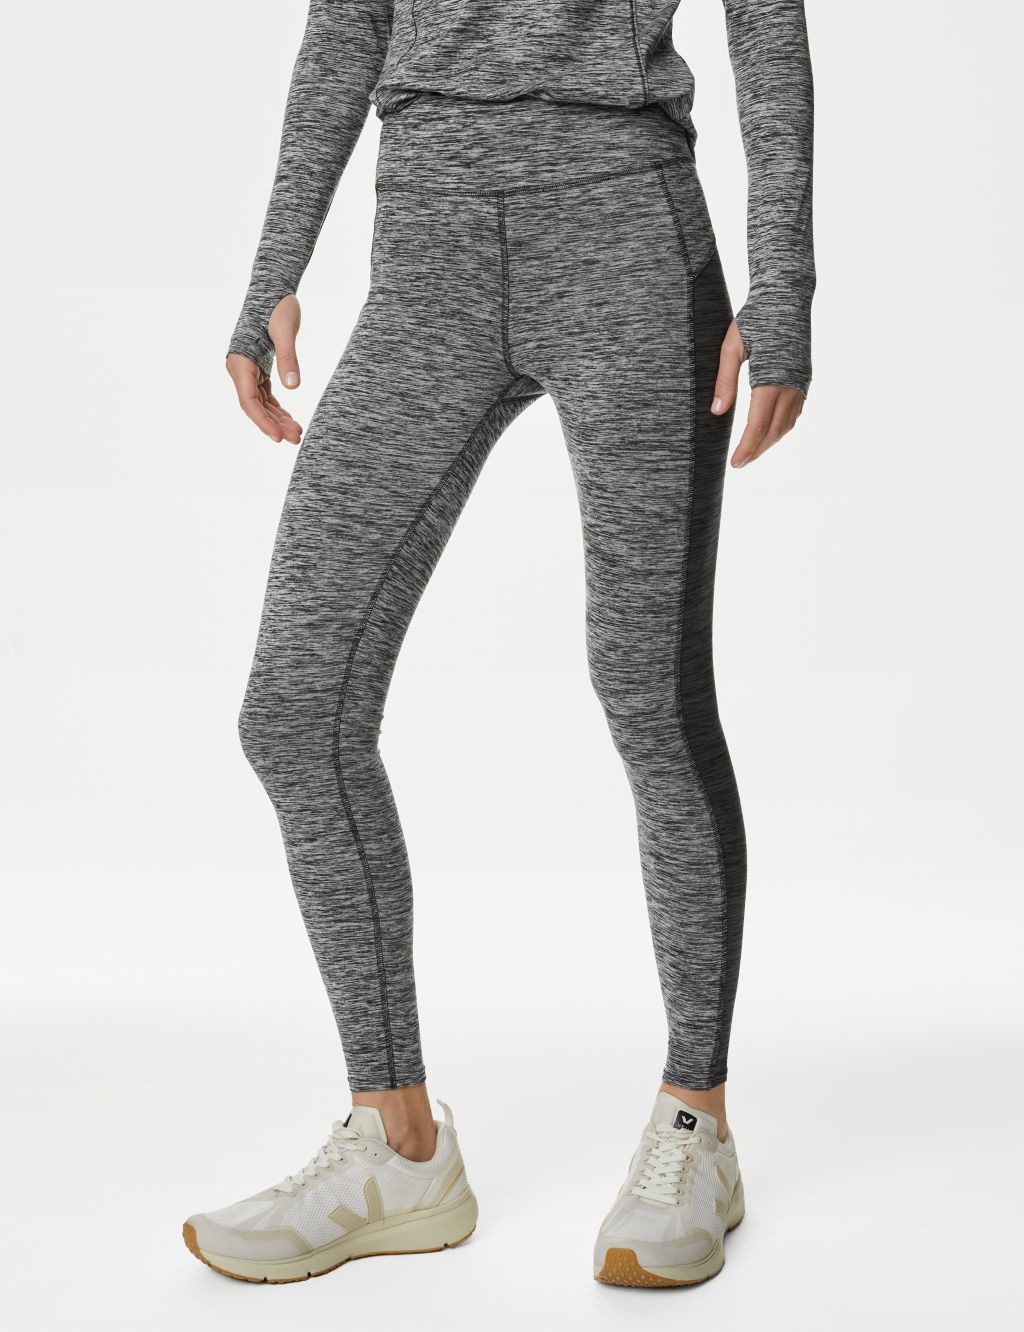 These M&S gym leggings pretty much sell out every month (and we can see why)